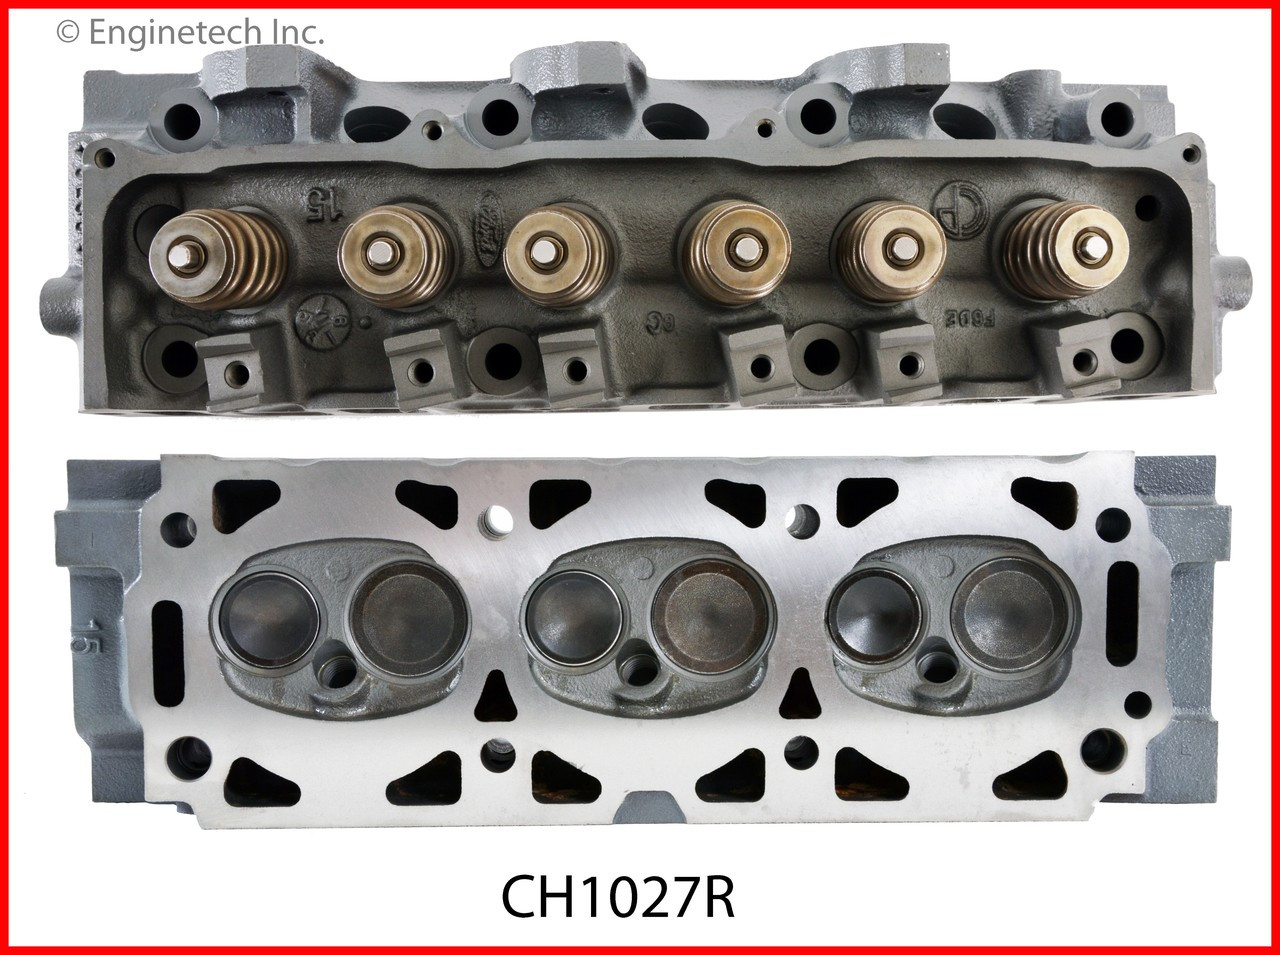 Cylinder Head Assembly - 2006 Ford Taurus 3.0L (CH1027R.E41)